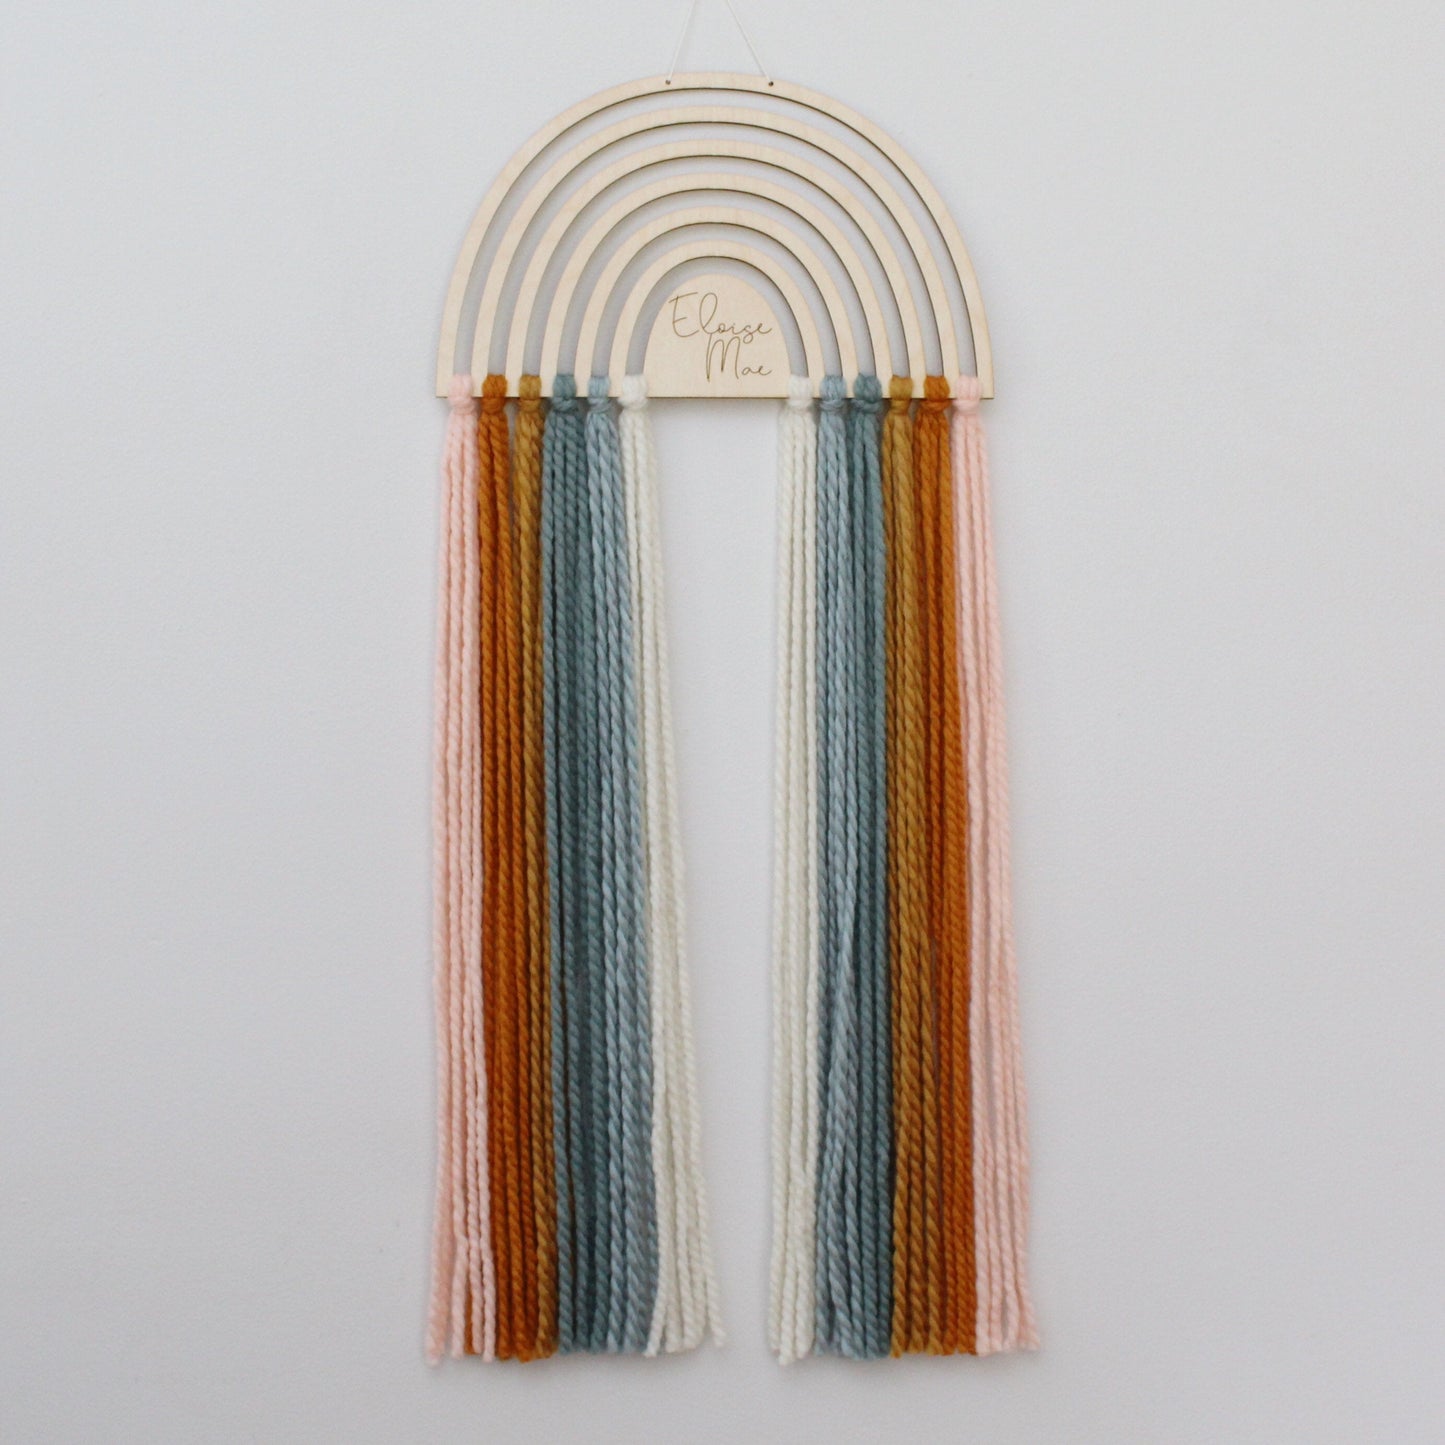 personalized wood and yarn rainbow wall hanging